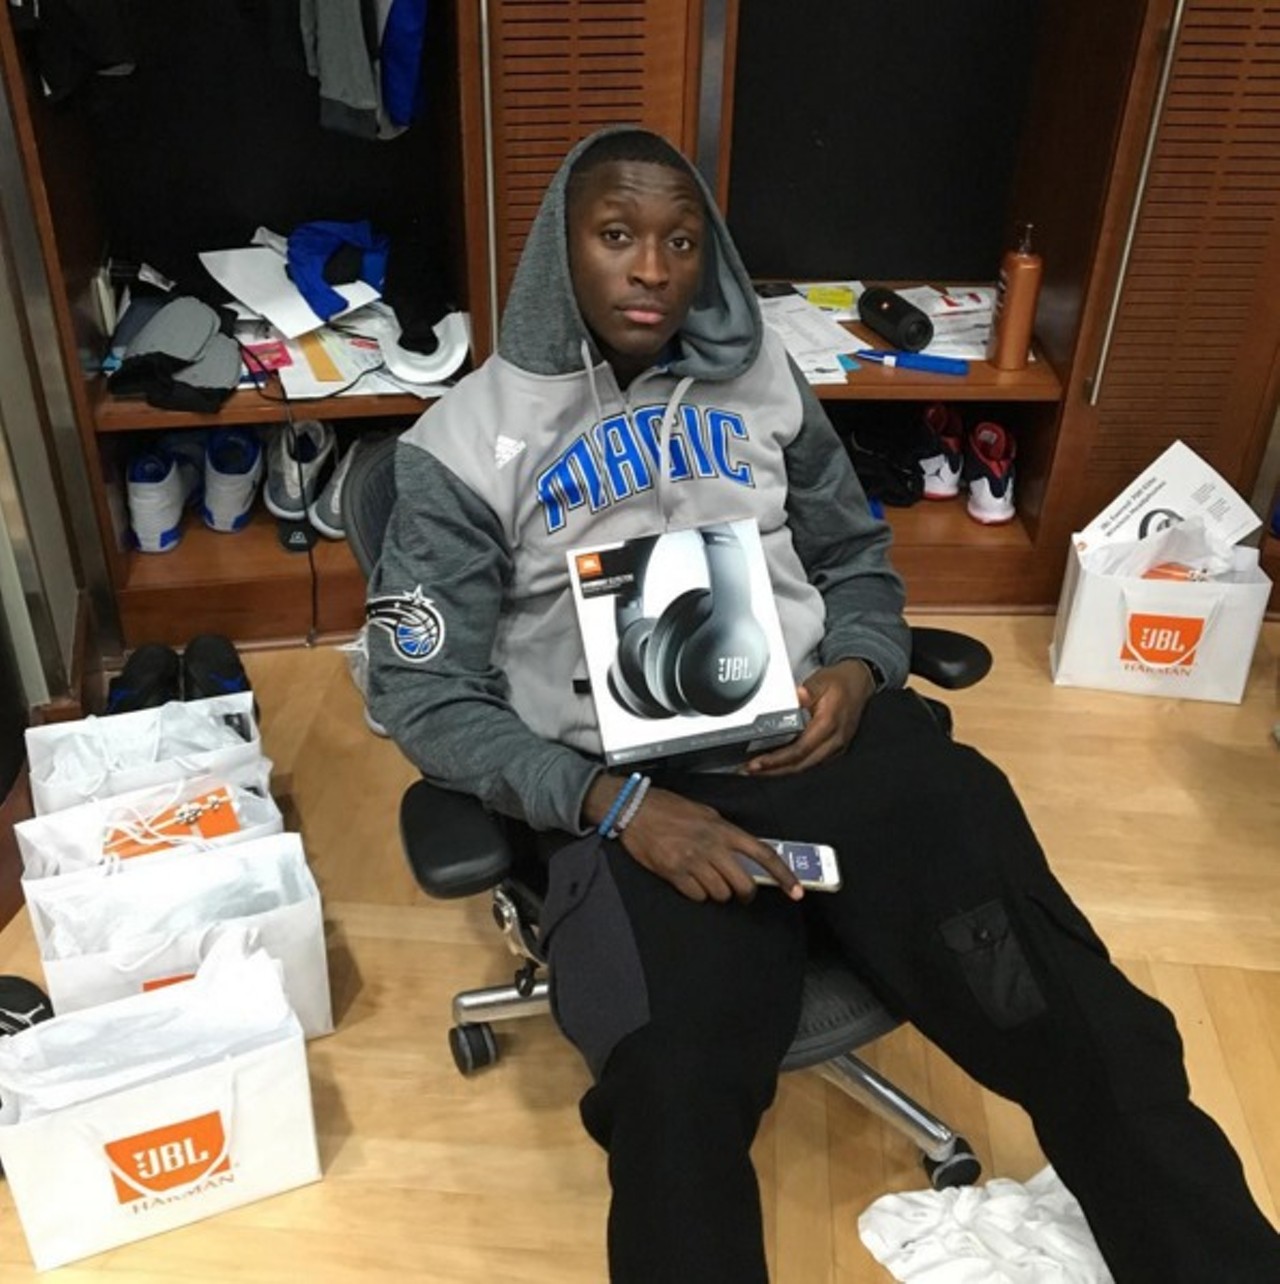 @vicoladipo | Check out Orlando Magic's Victor Oladipo and his official Instagram, which features action shots of the professional athlete in action at Amway.